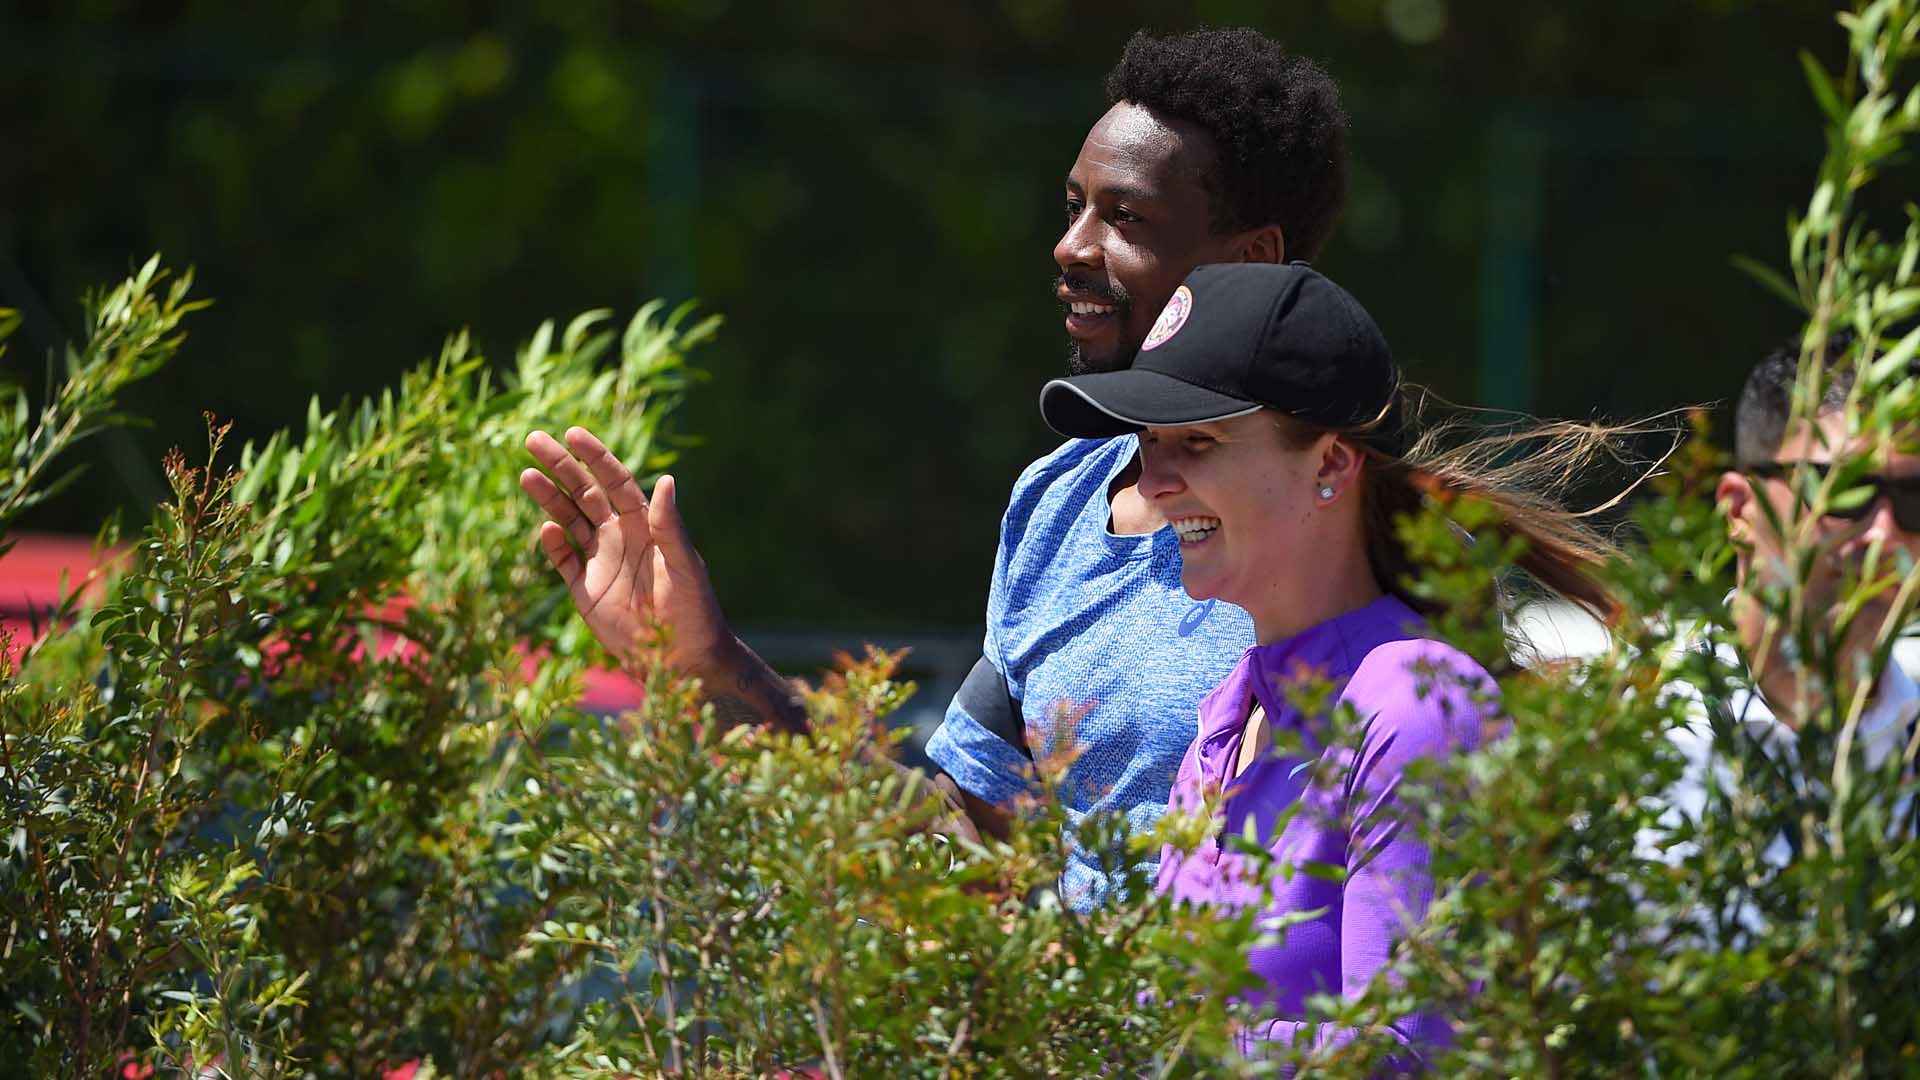 Gael Monfils and Elina Svitolina, pictured here at the 2021 Internazionali BNL d'Italia, were married on Friday in Geneva.